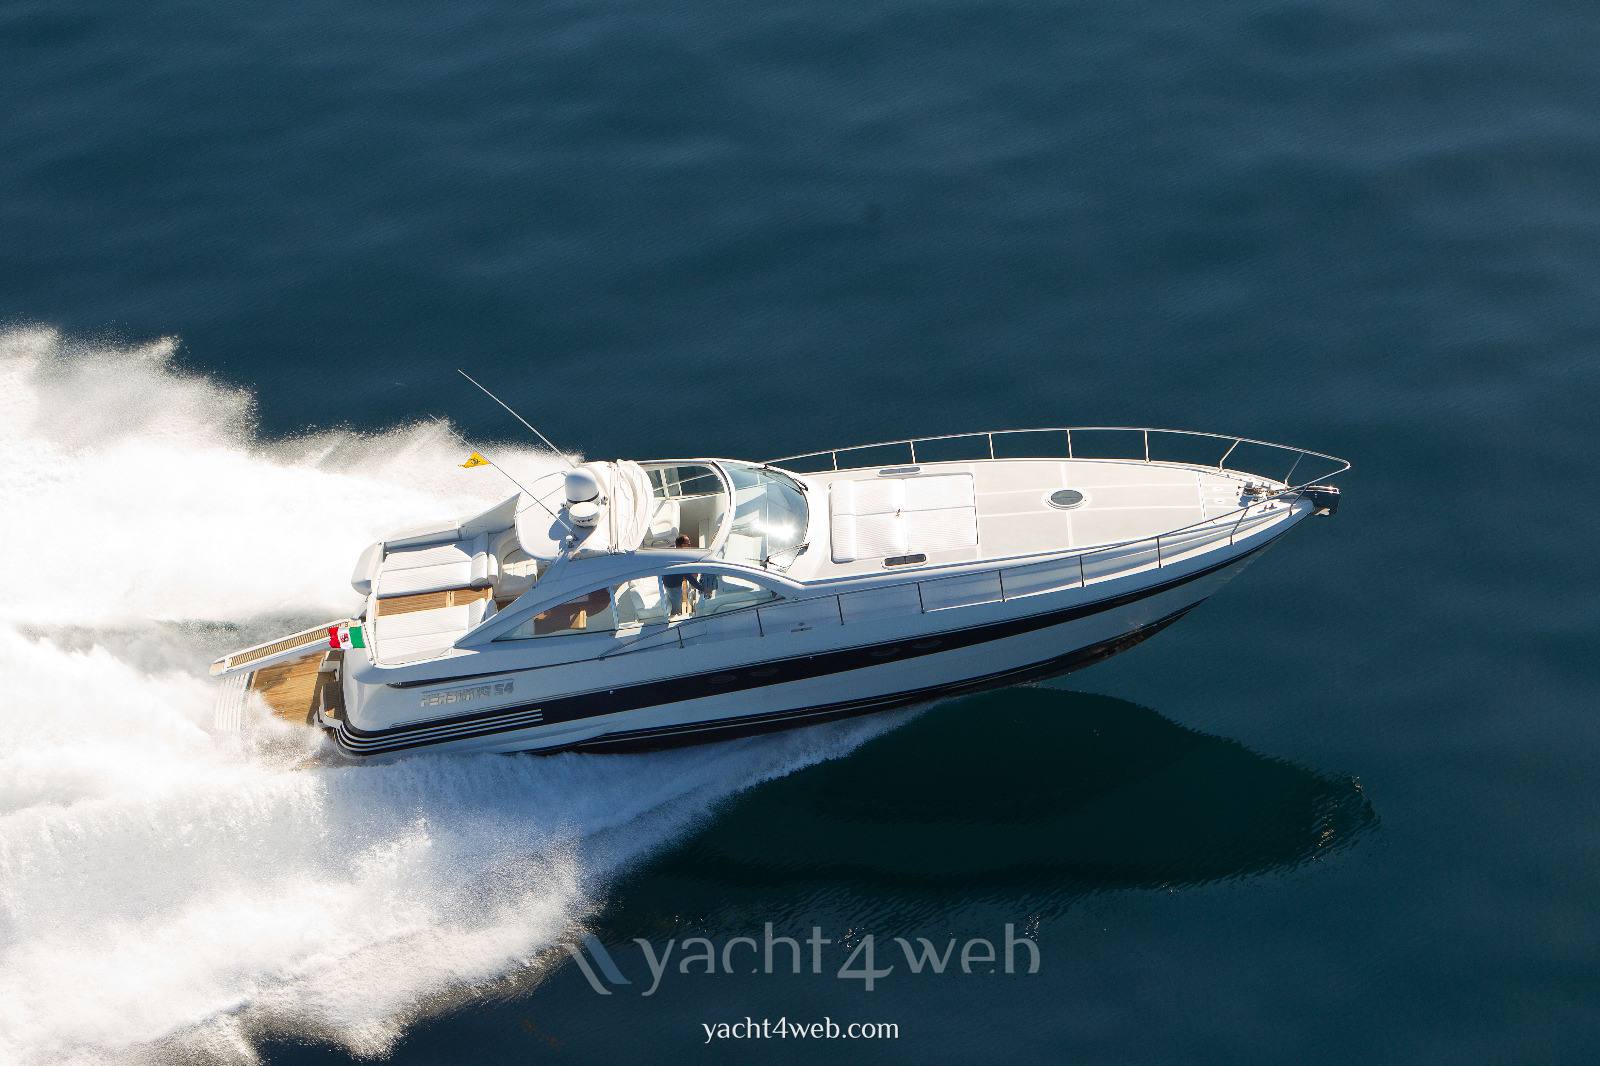 Pershing 54 Motor boat used for sale